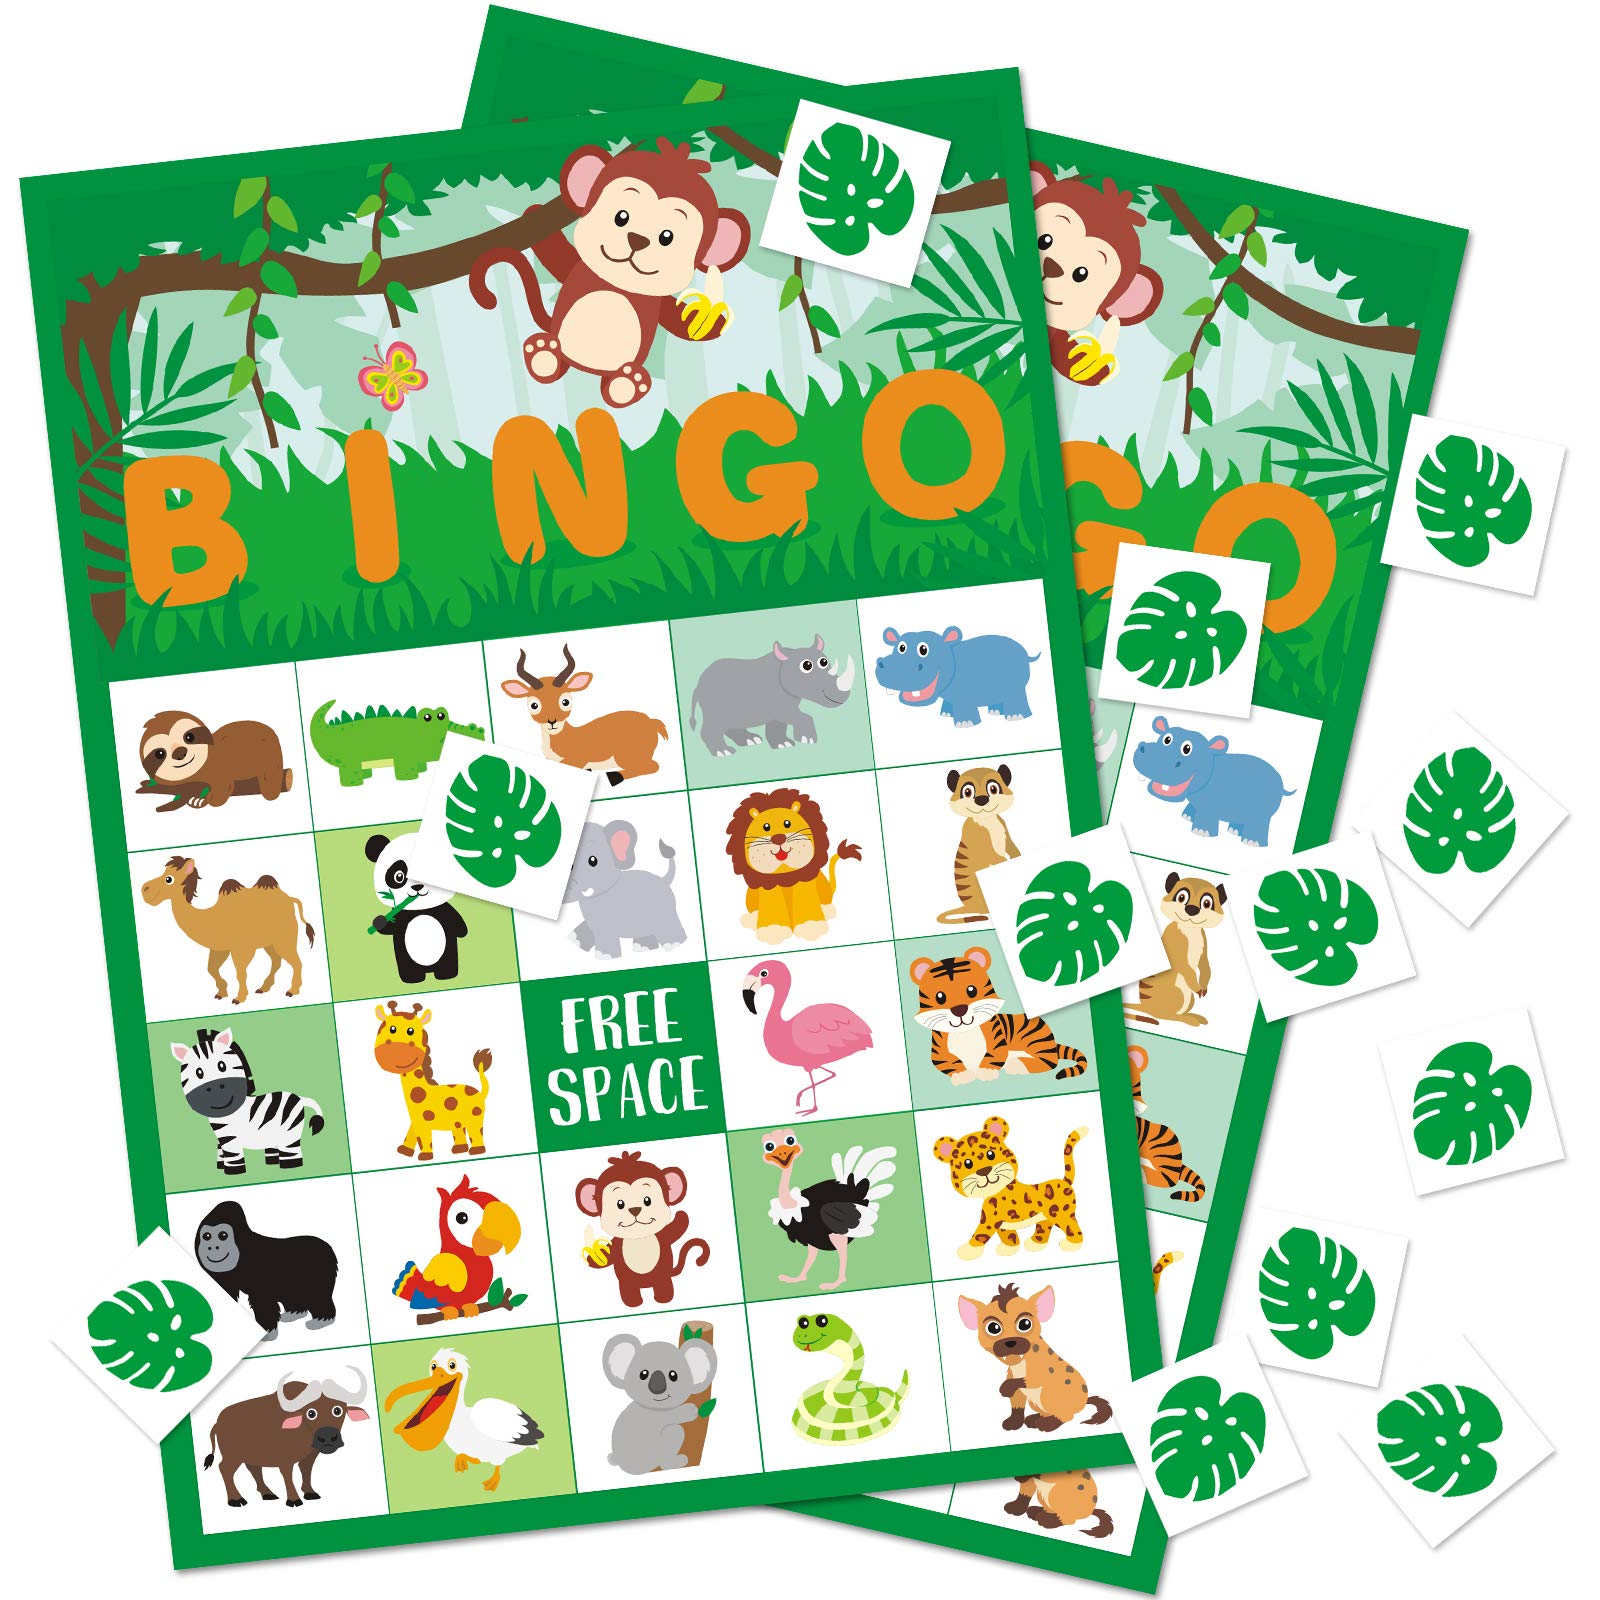 Bessmoso Safari Party Bingo game Jungle Theme Party Favors Supplies Safari Jungle Birthday Baby Shower games for Kids Adults 24 Players